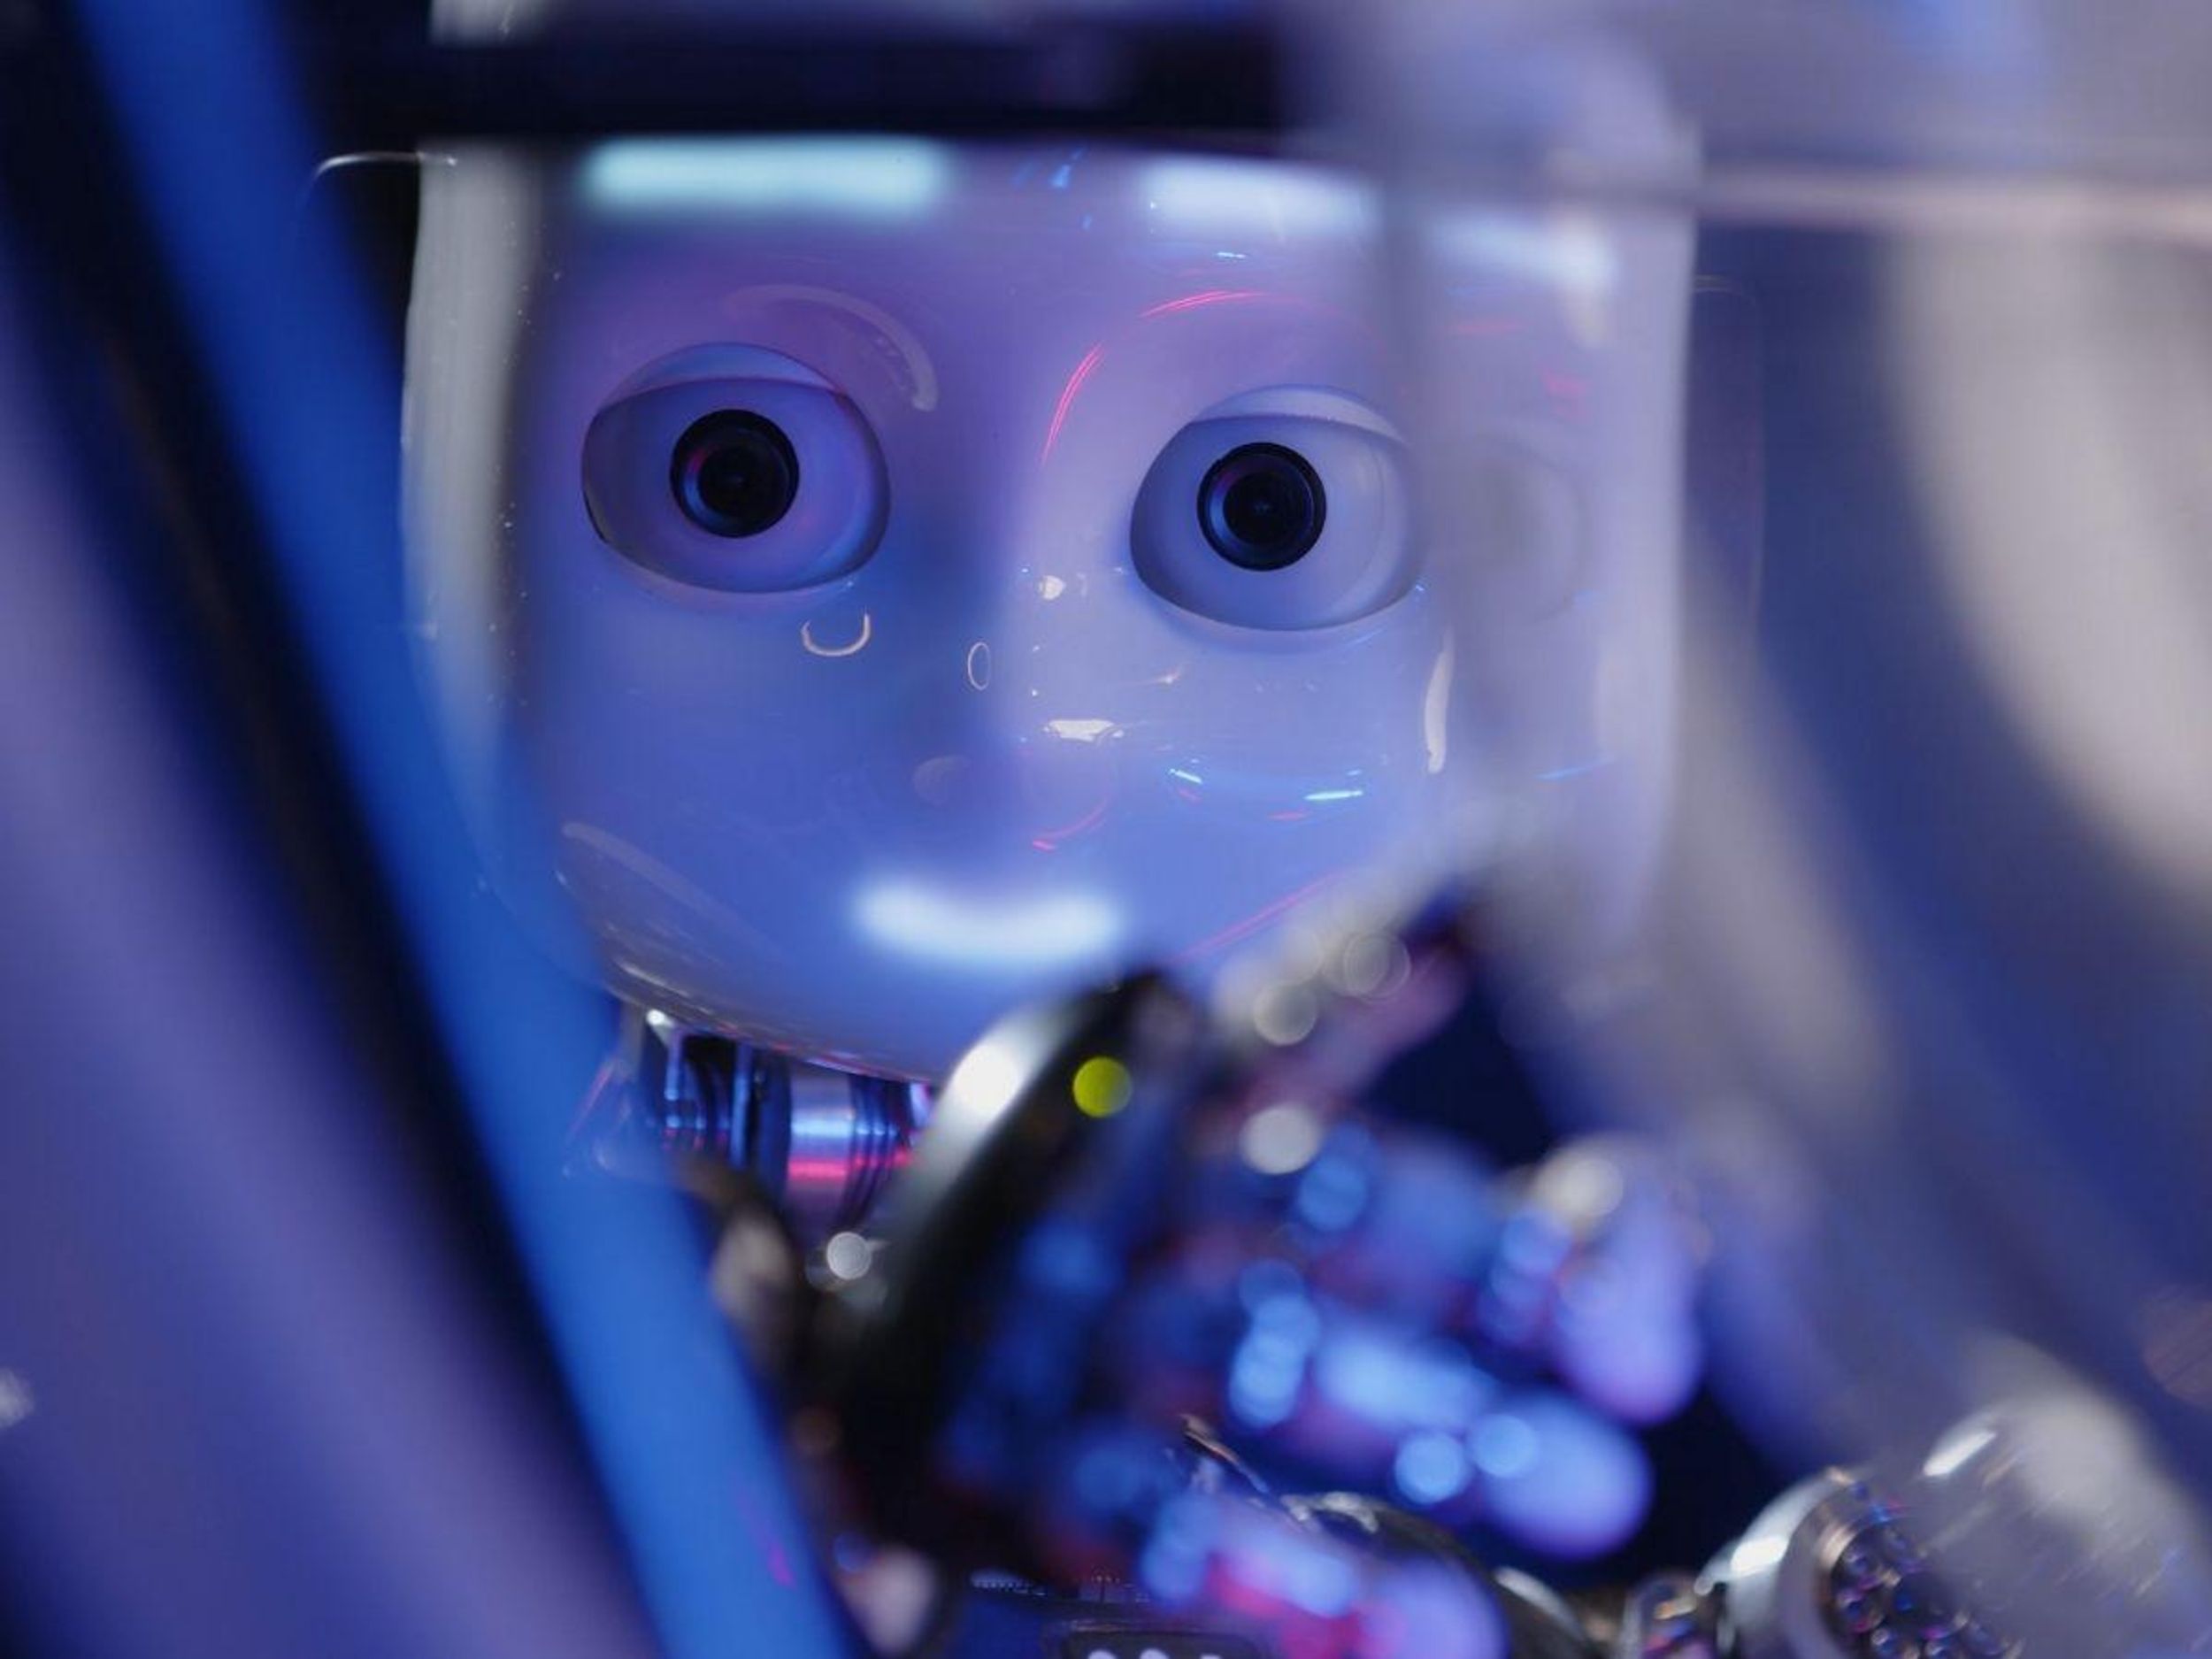 A child-like robotic face 